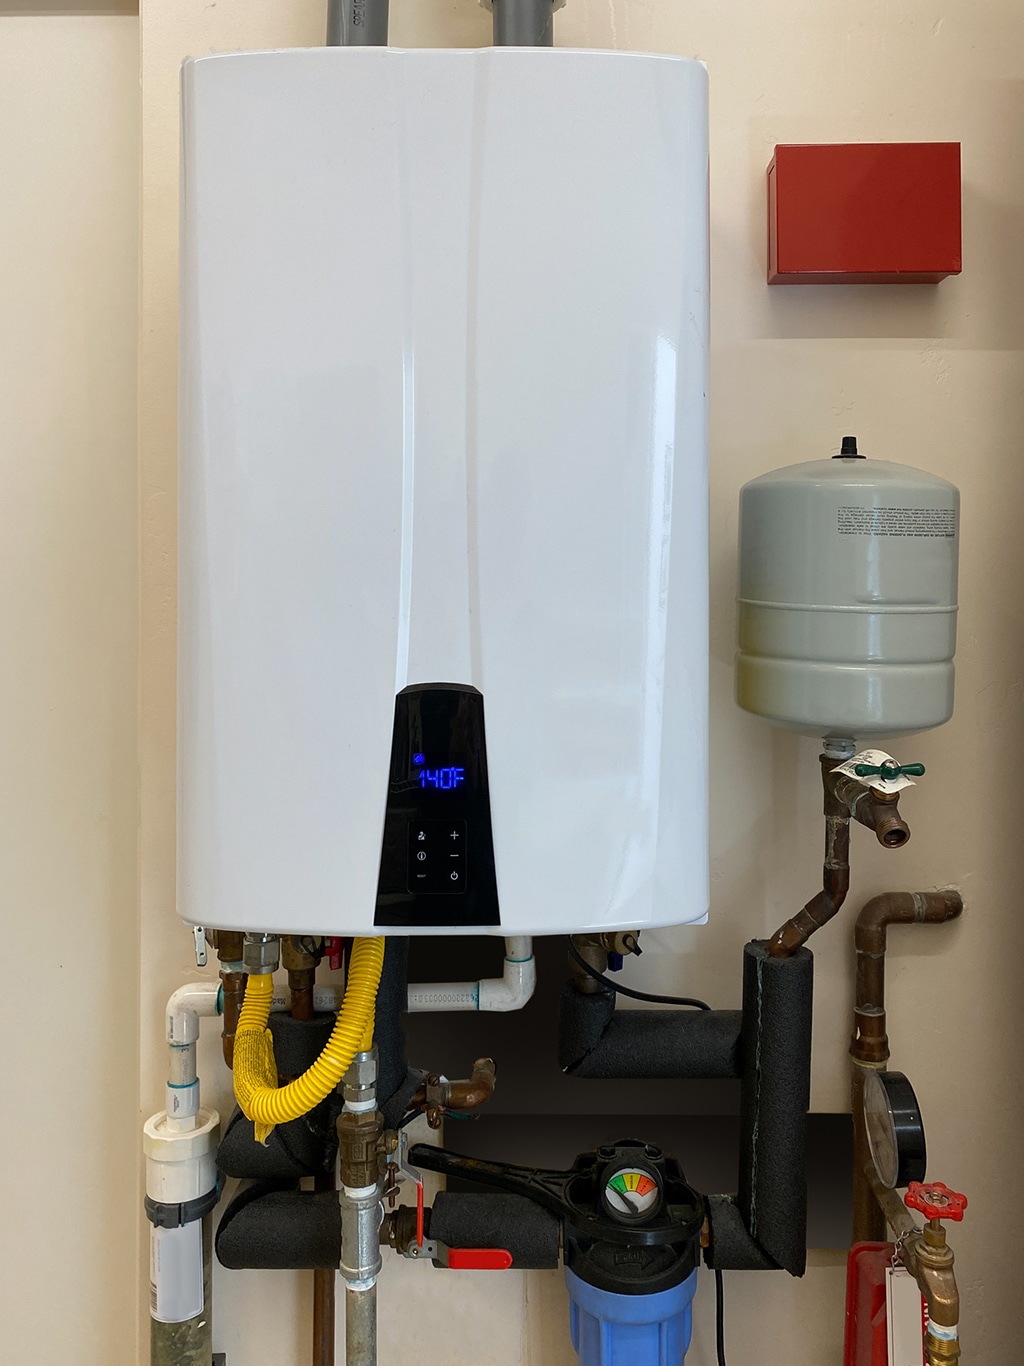 Do Tankless Water Heaters Require Less Water Heater Repair? Are There Other Benefits? | Conway, SC